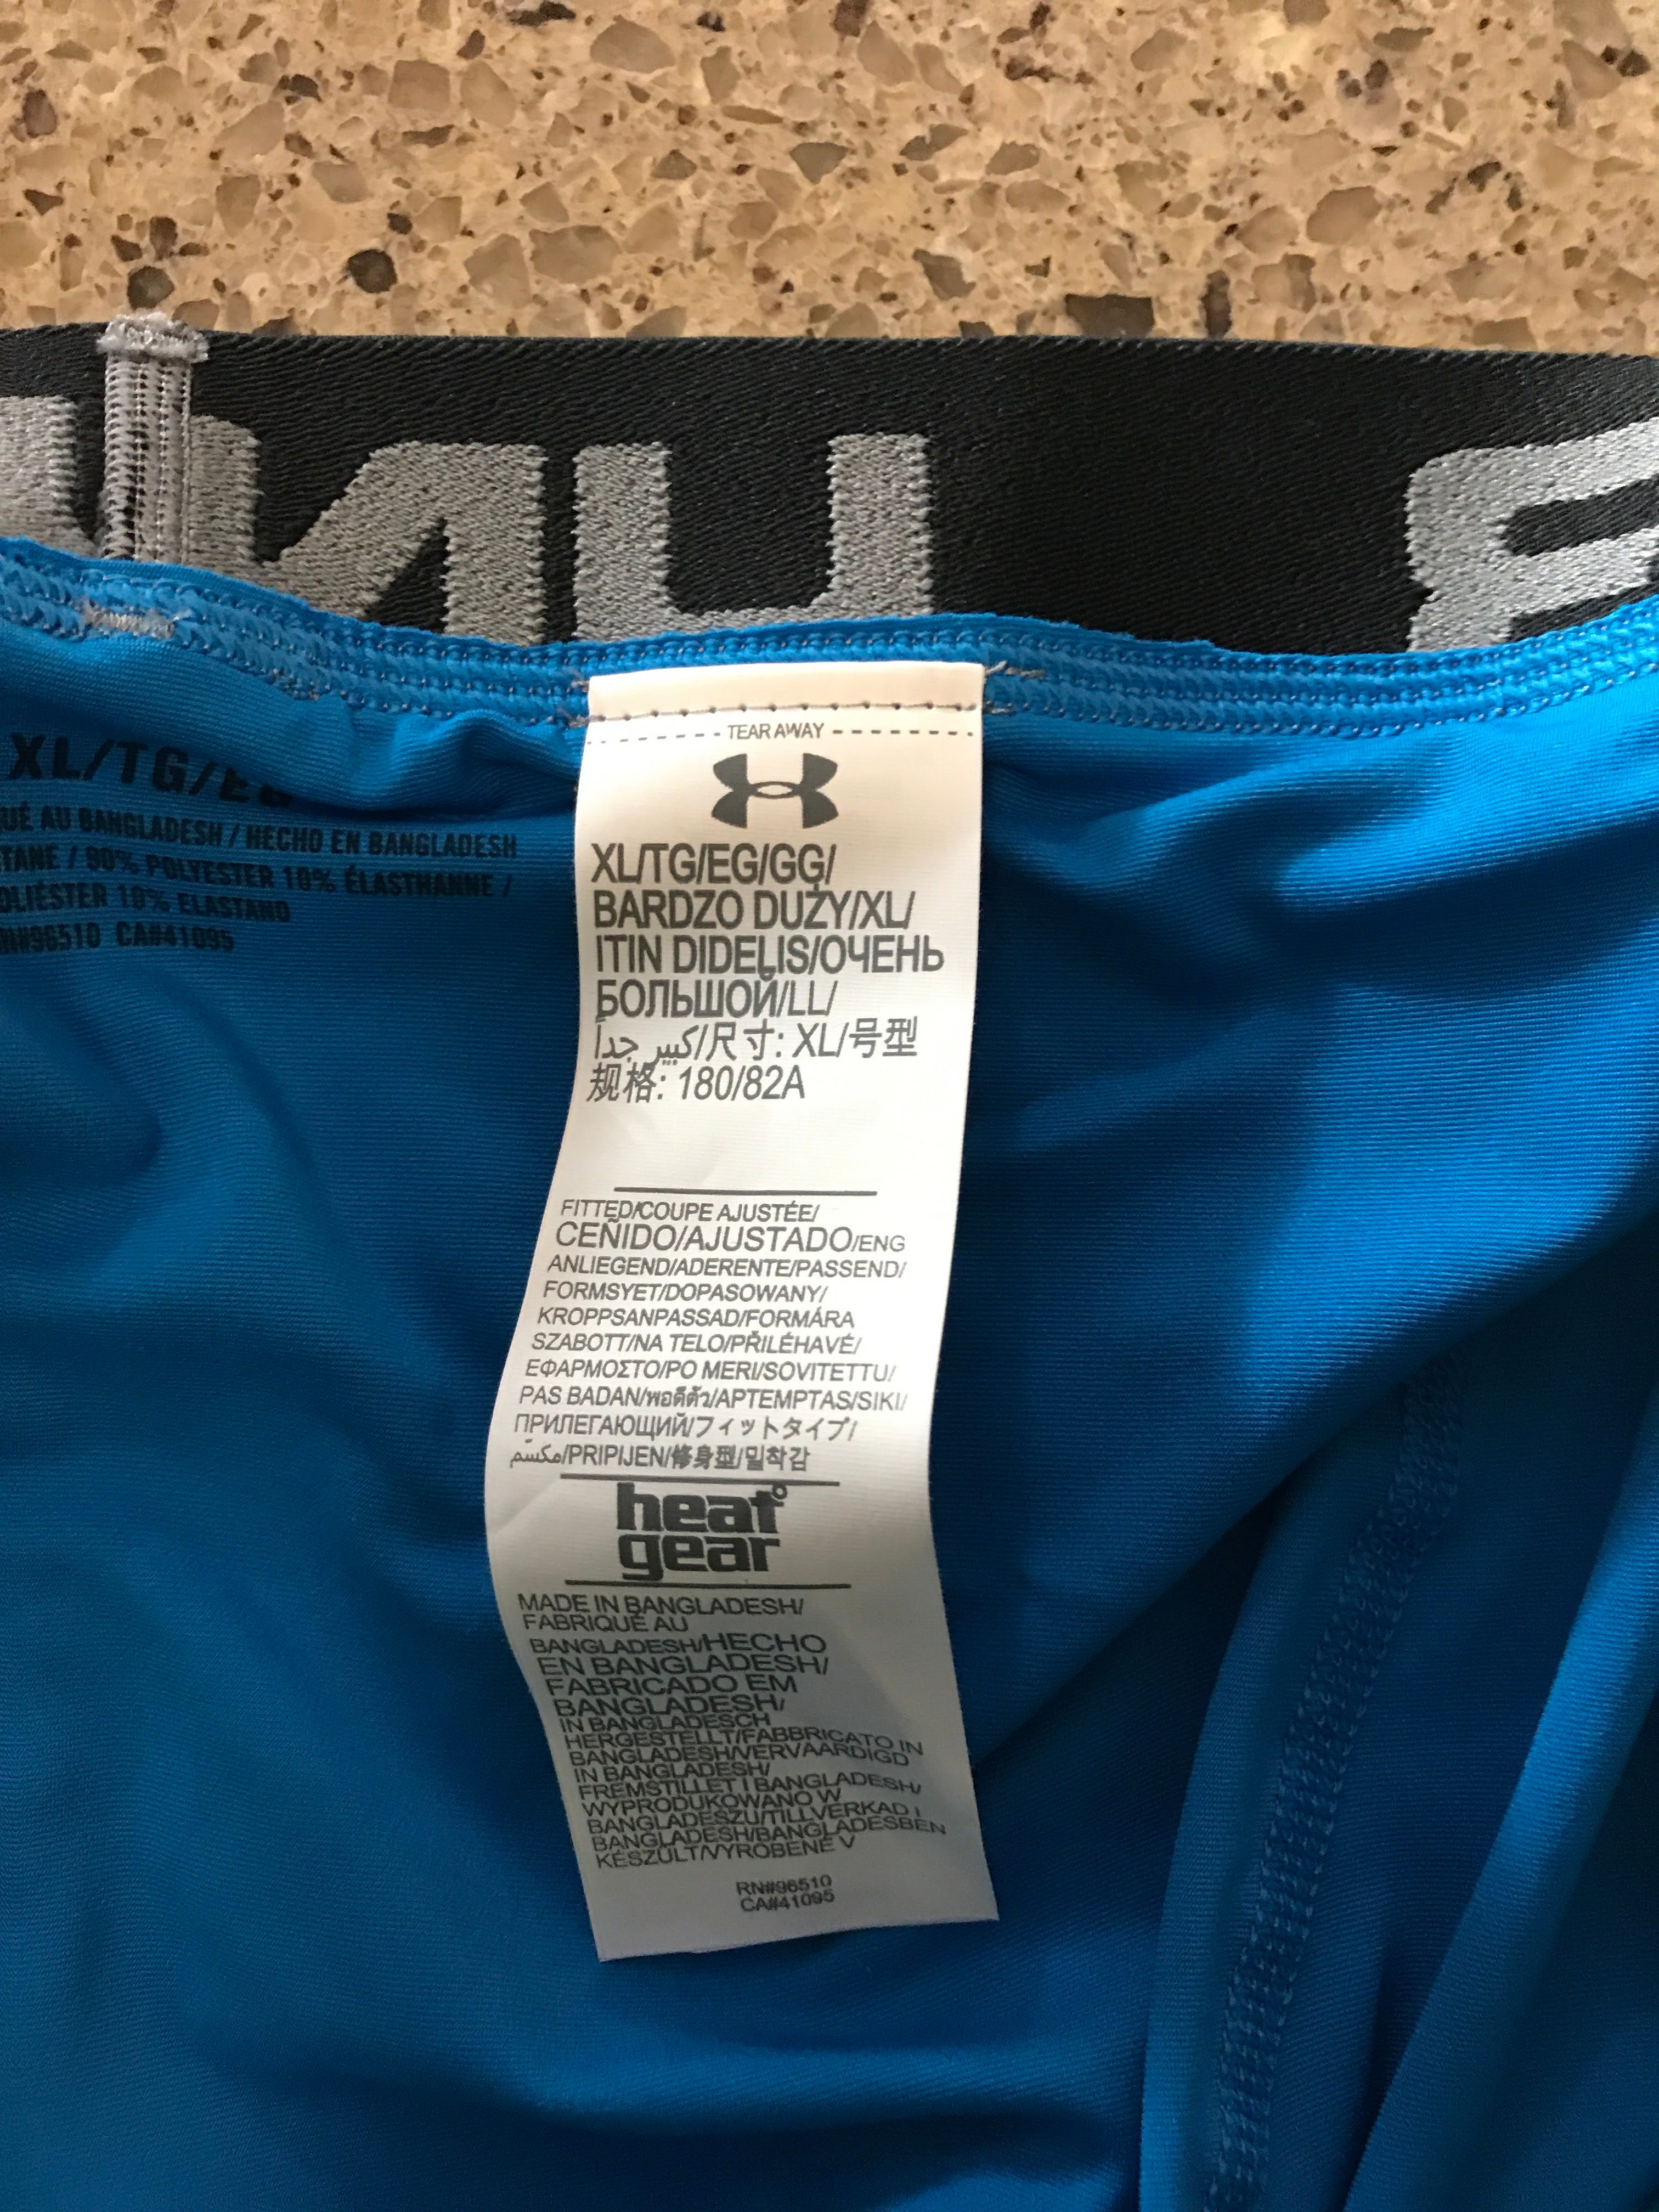 Under Armour Boxerjock review. Sometimes Under Armour stuff can be